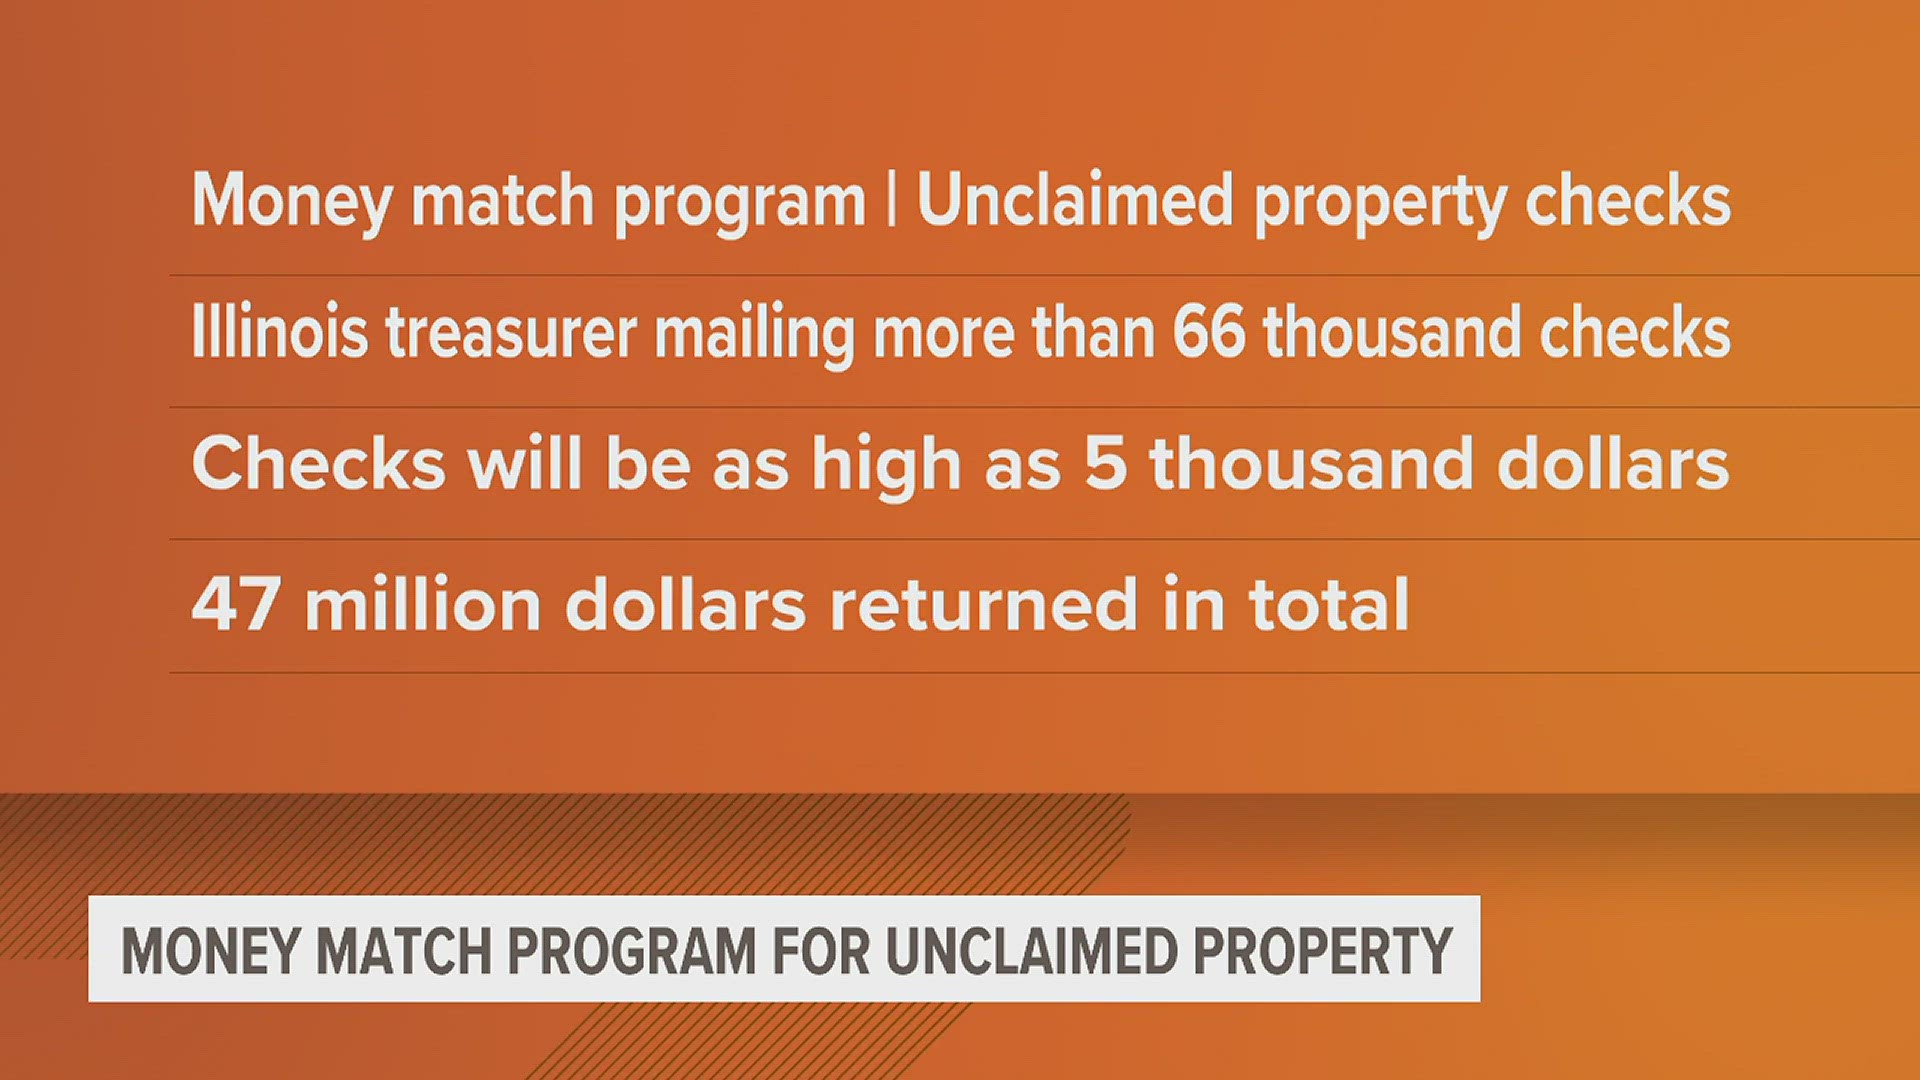 The Illinois Treasurer's Office is mailing over 66,000 checks to citizen with unclaimed property. Eligible citizens could receive a check for $5,000.